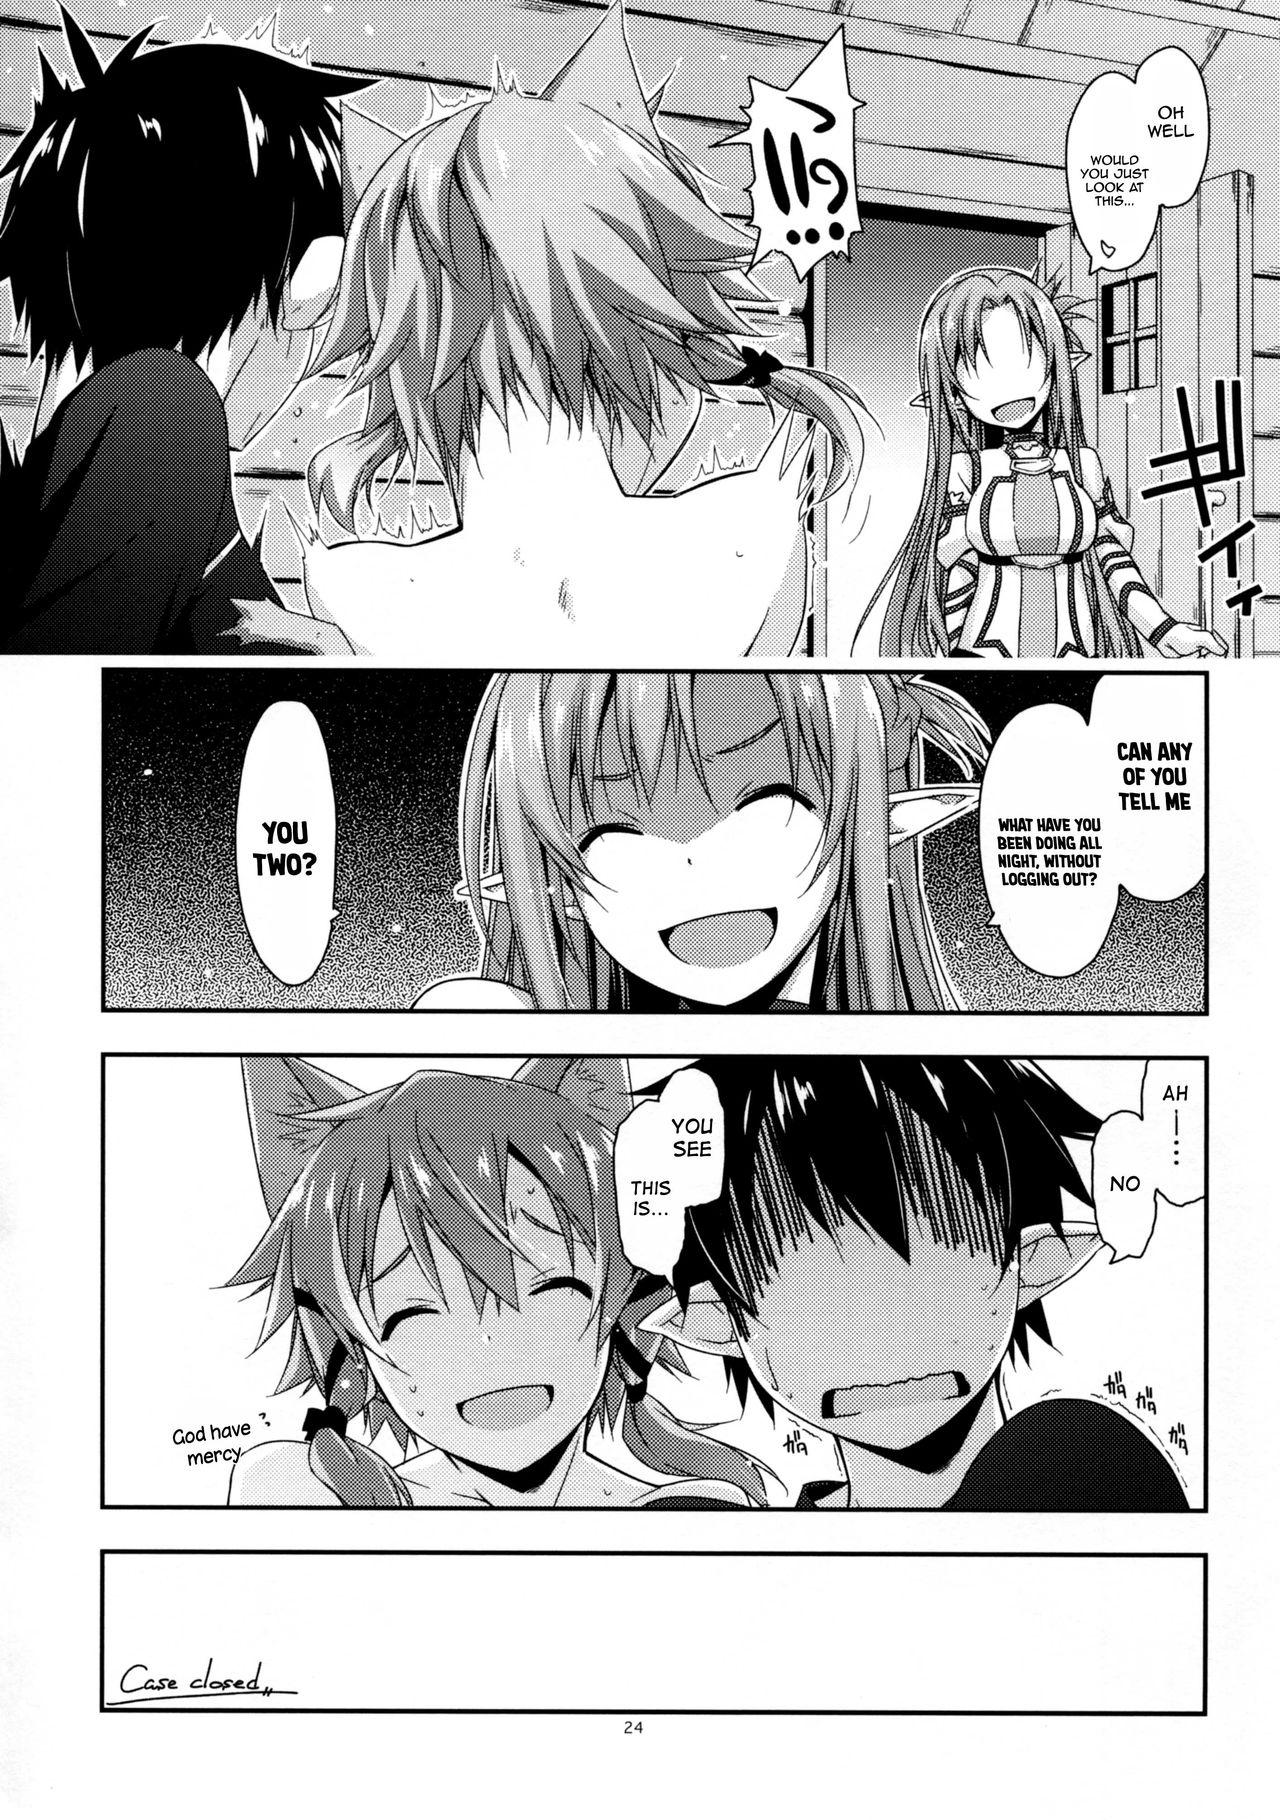 Anal Play Case closed. - Sword art online Mistress - Page 24